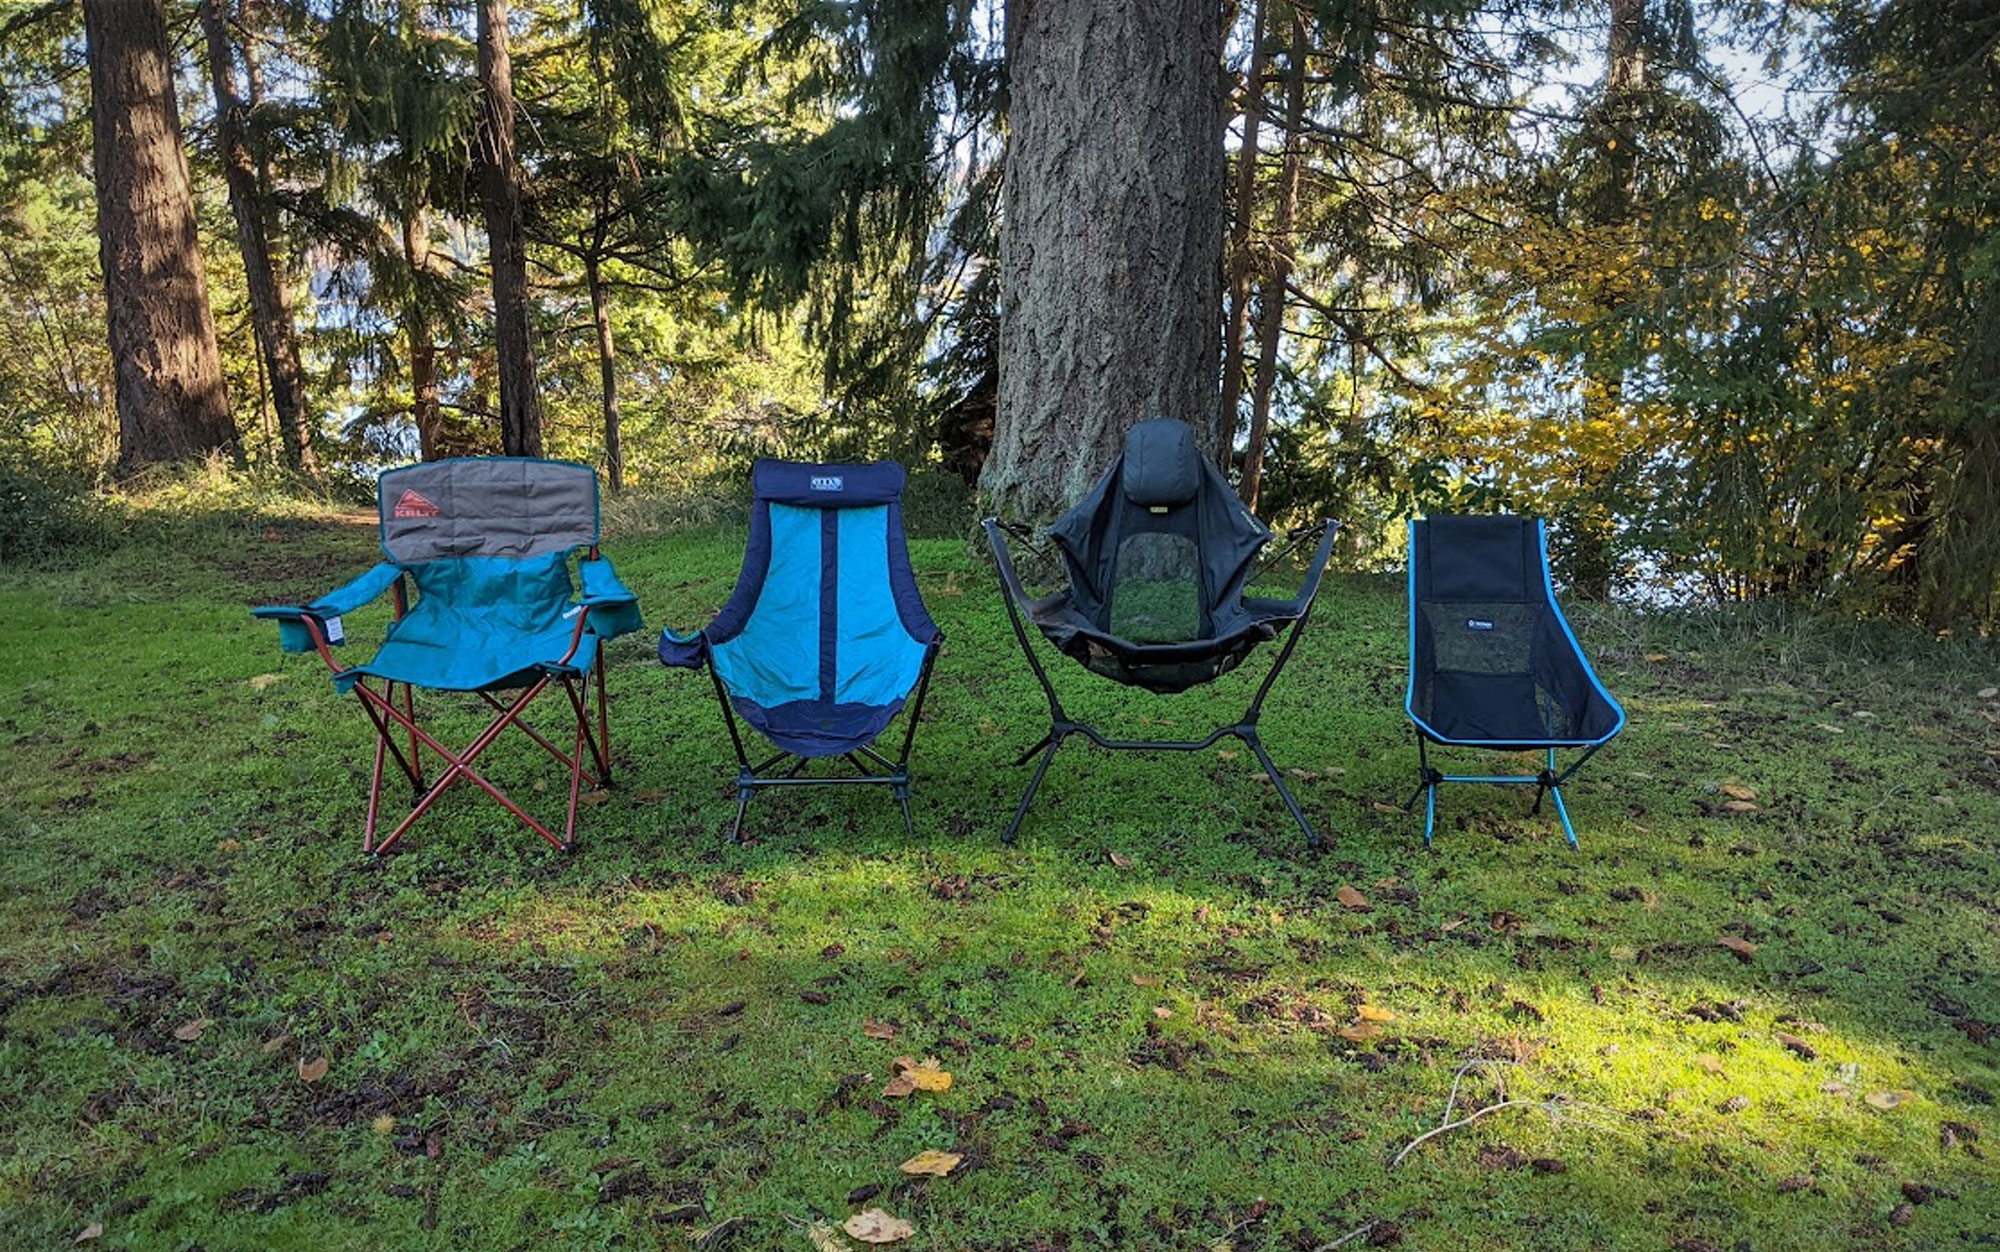 We tested the best camp chairs.